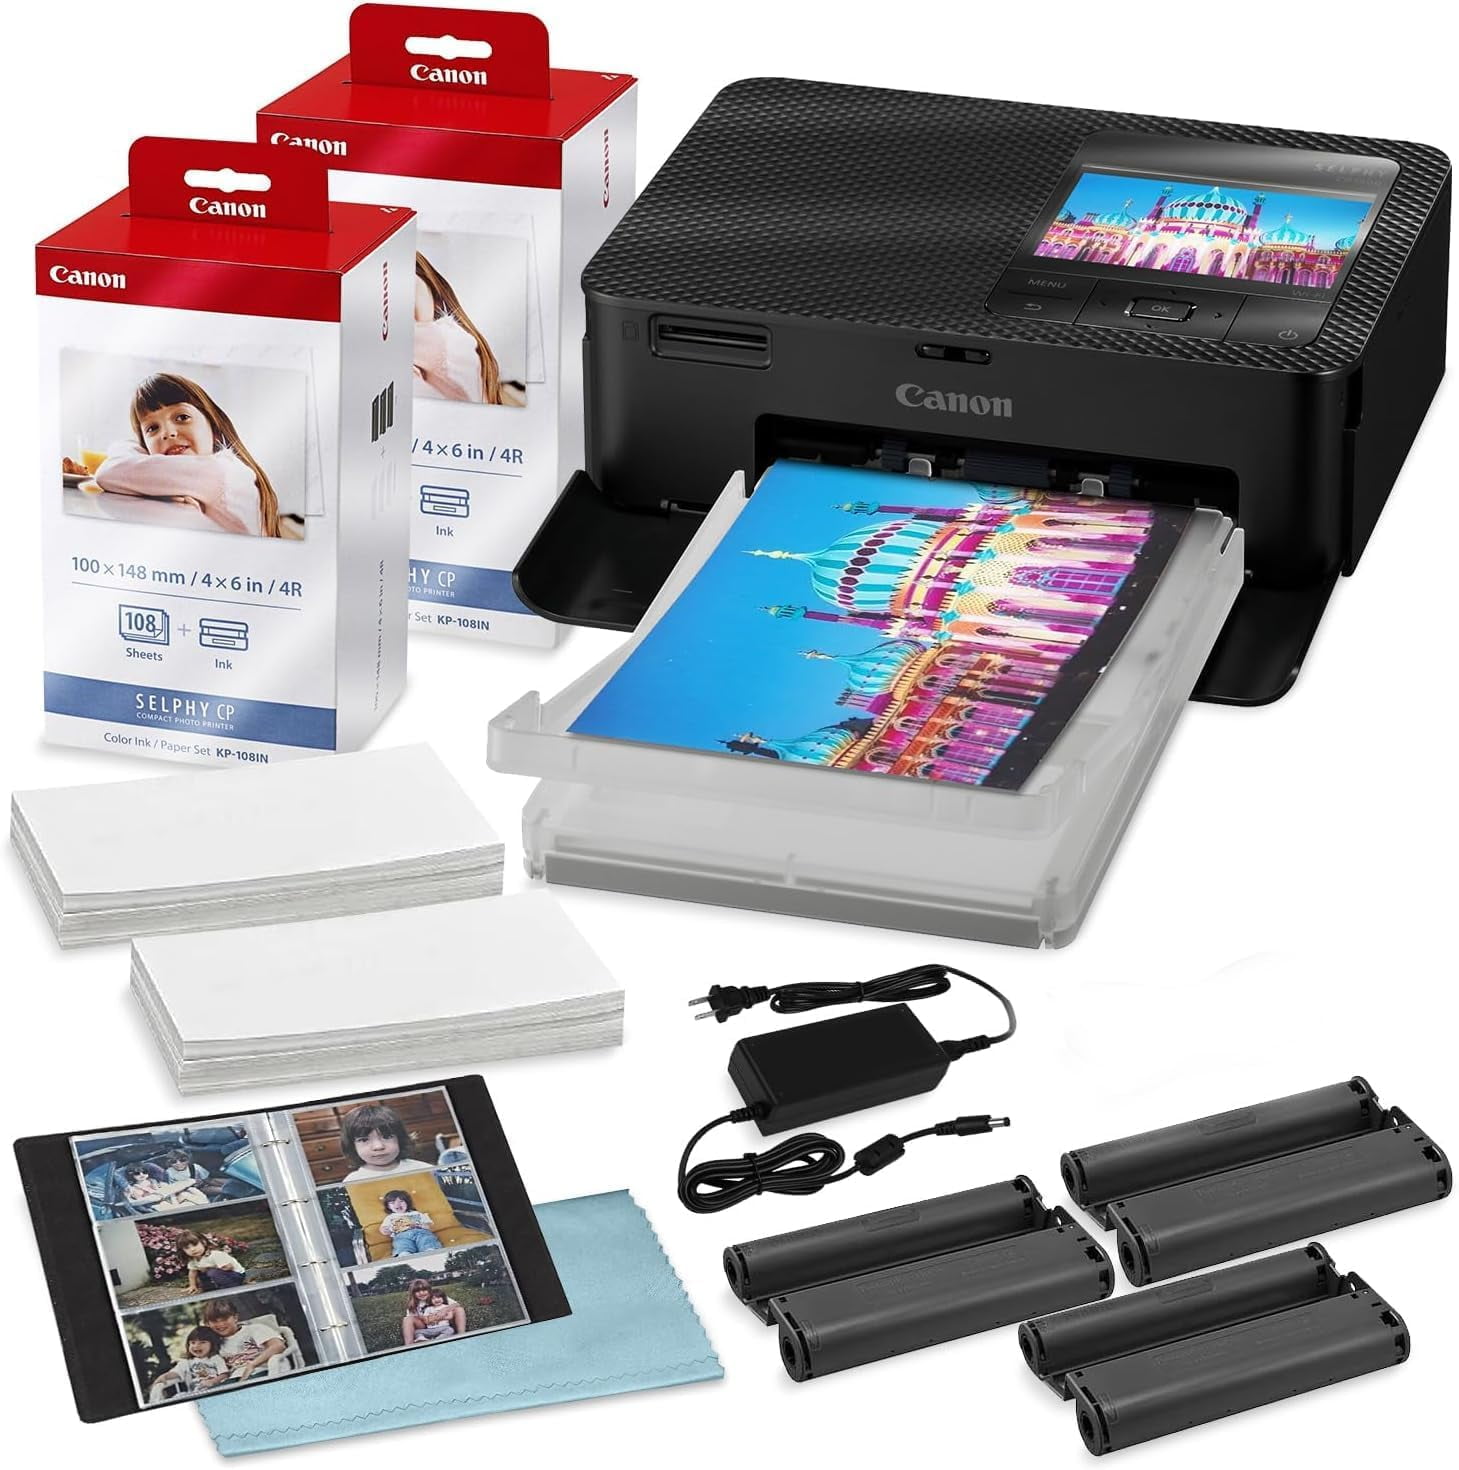  Canon 5539C001 SELPHY CP1500 Wireless Compact Photo Printer,  Black Bundle SELPHY Color Ink/Label XS-20L Set (20 Sheets + 1 Ink Cassette)  : Electronics